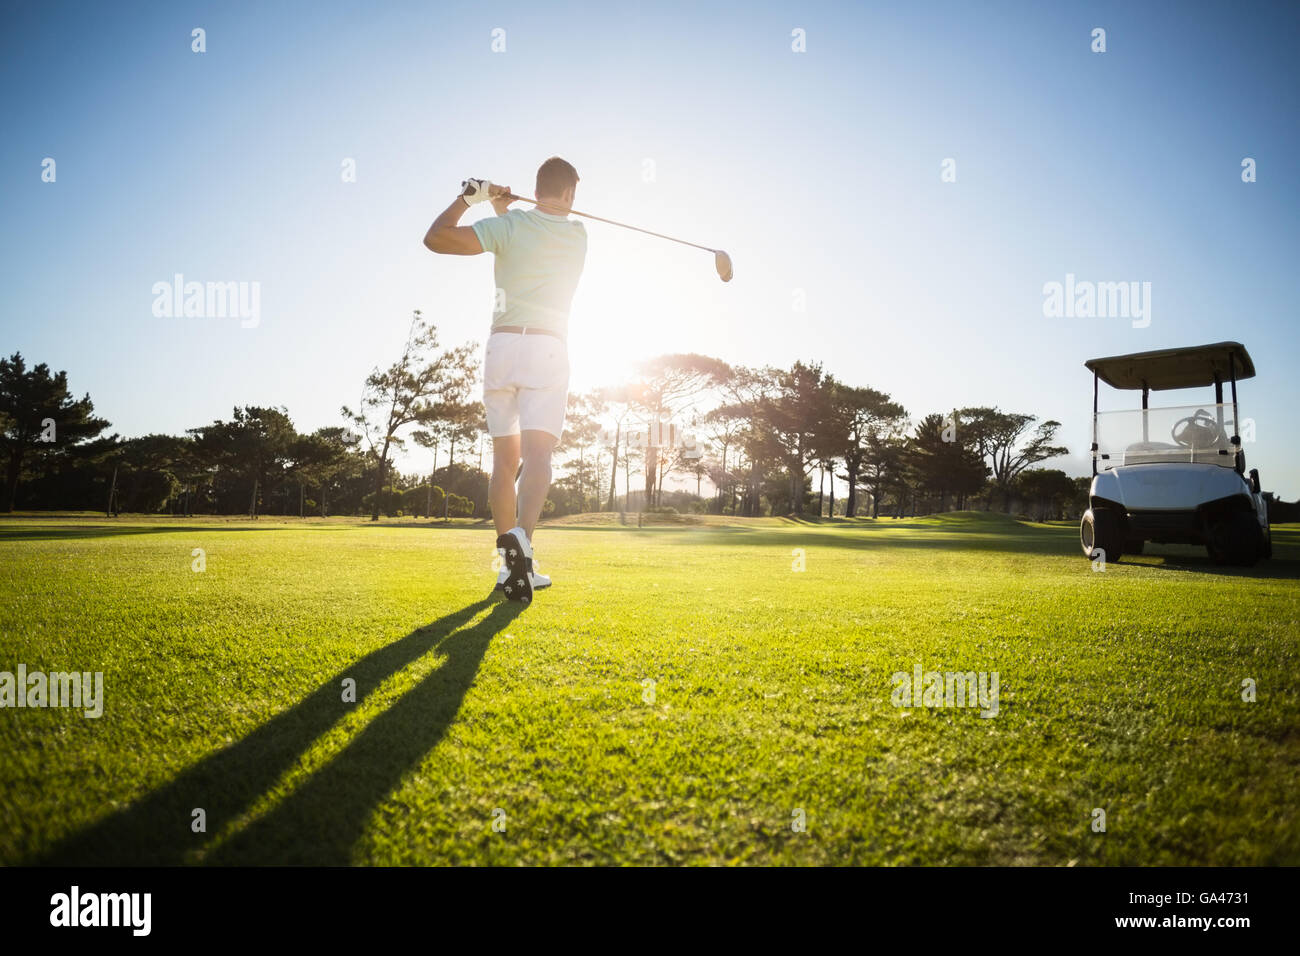 Rear view of male golfer taking shot Stock Photo